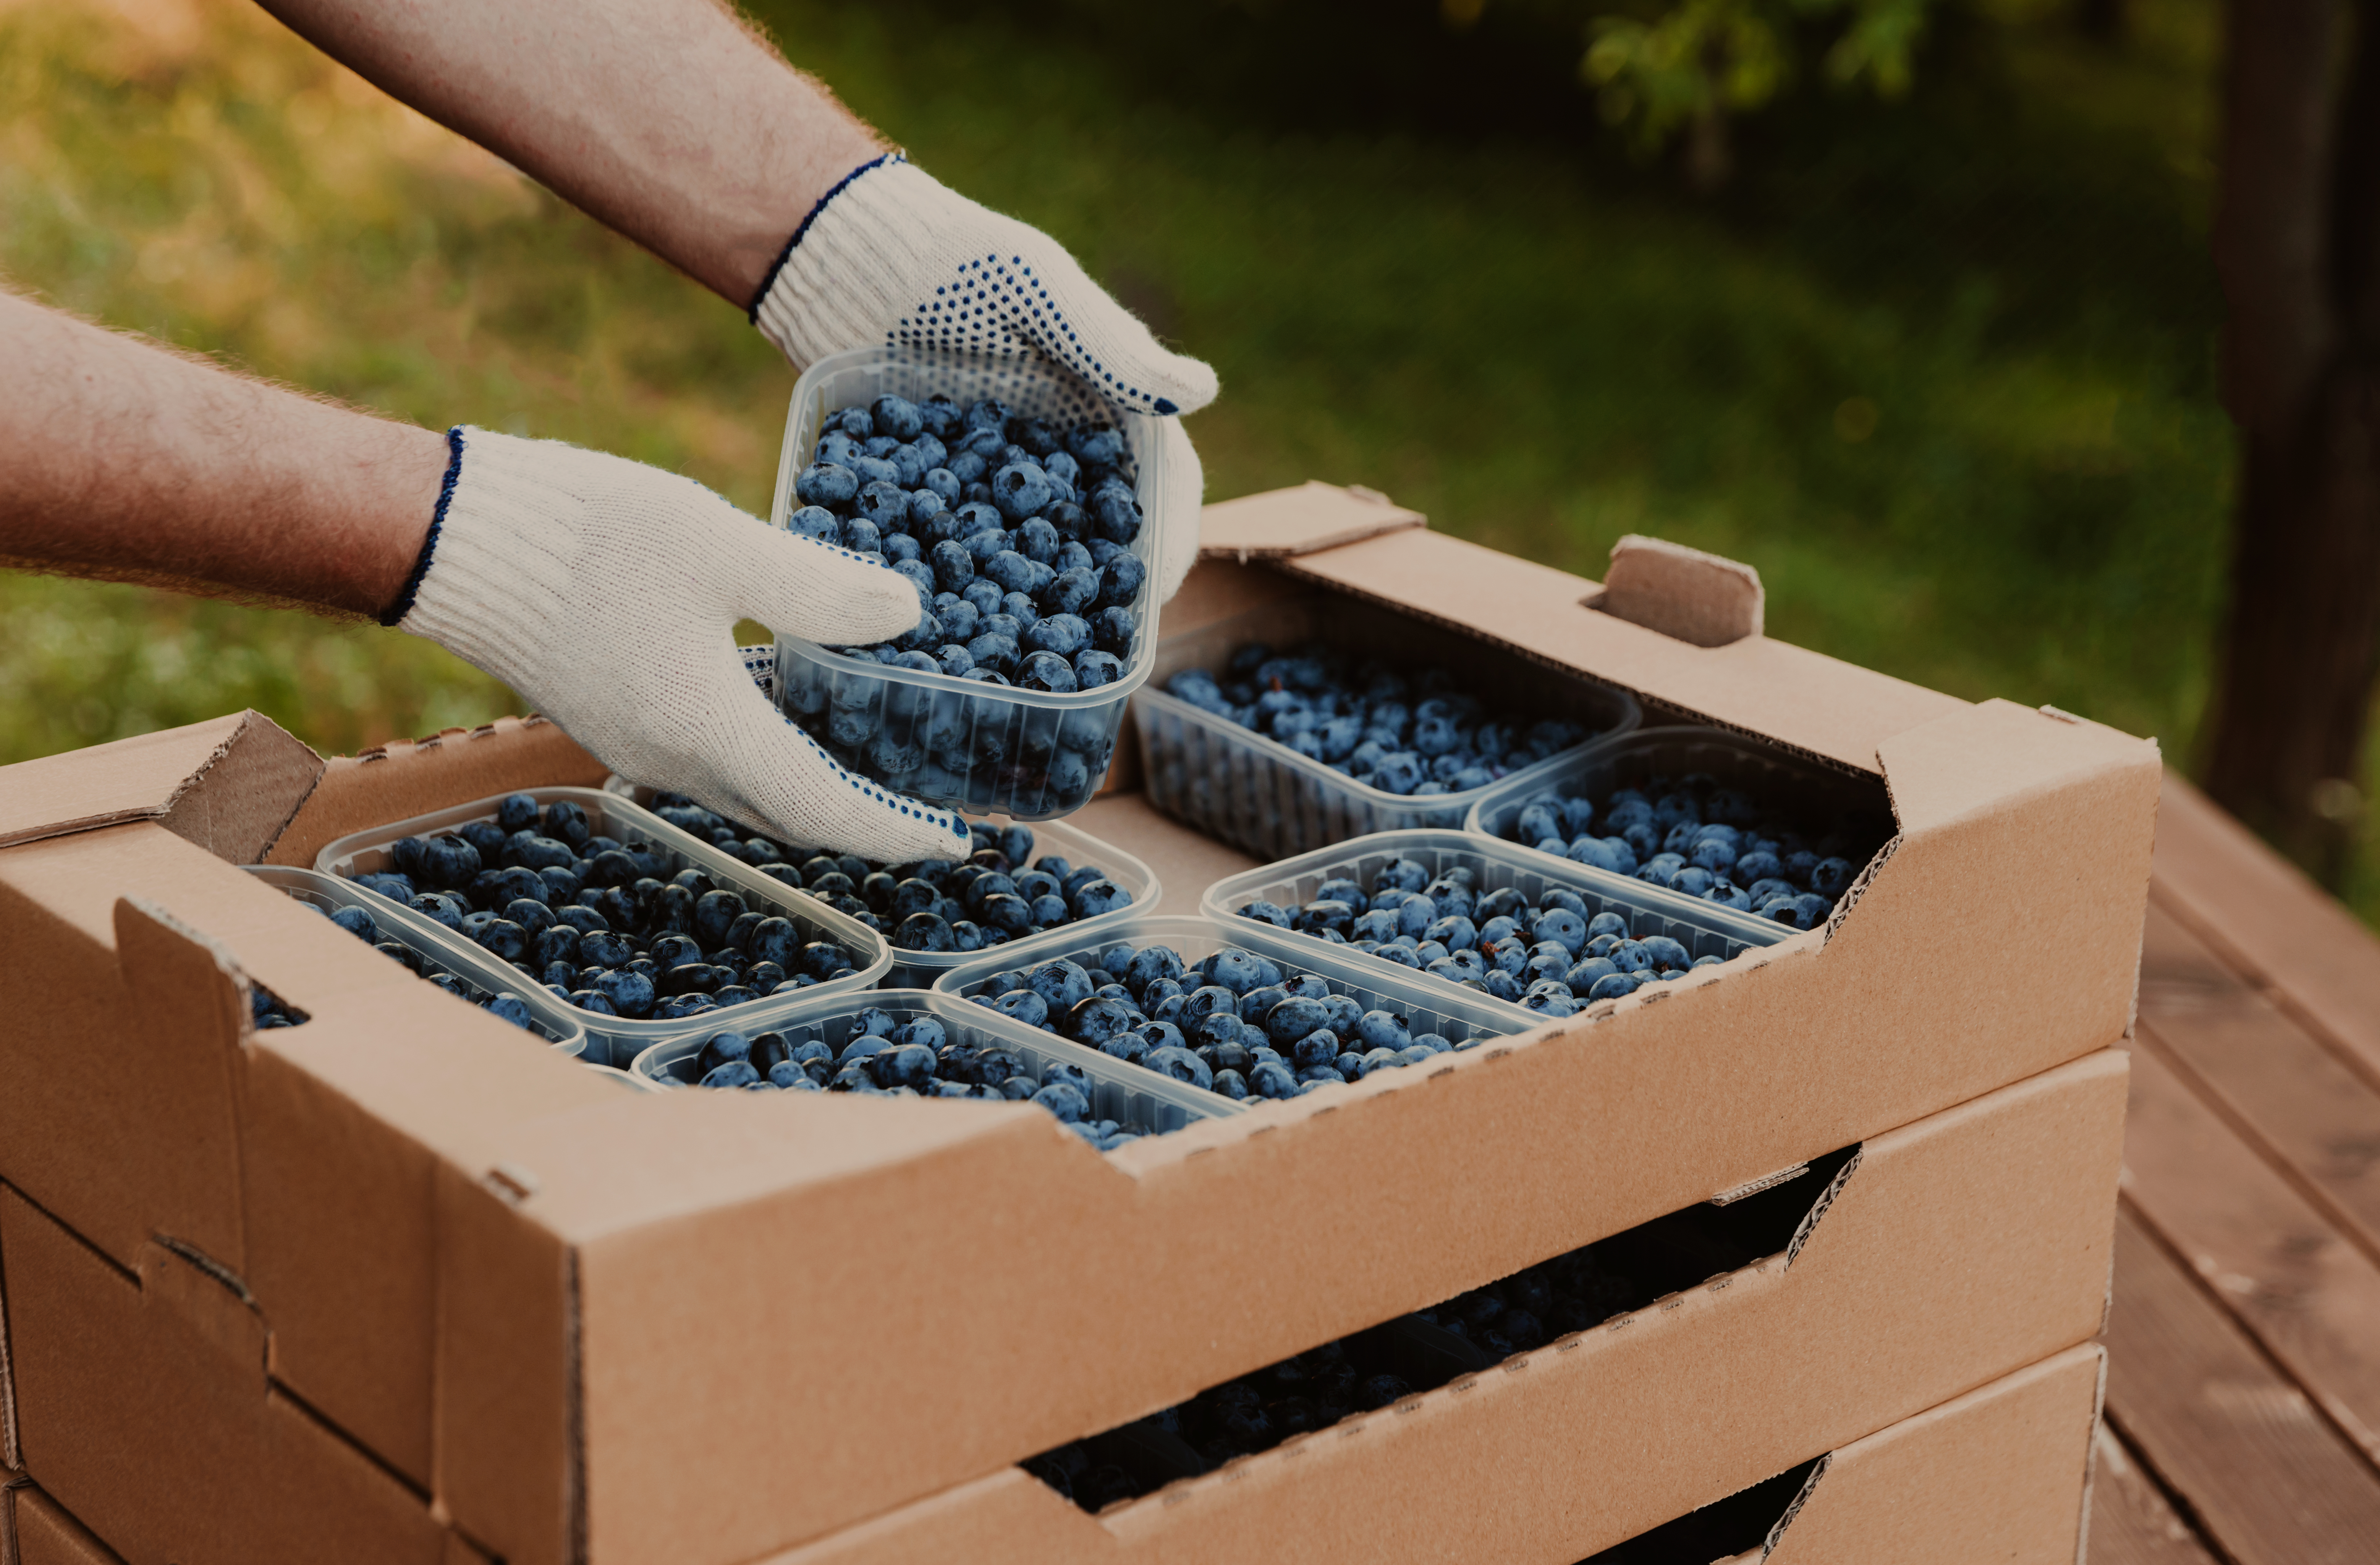 Hands holding container with blueberry over cardboard box with blueberry